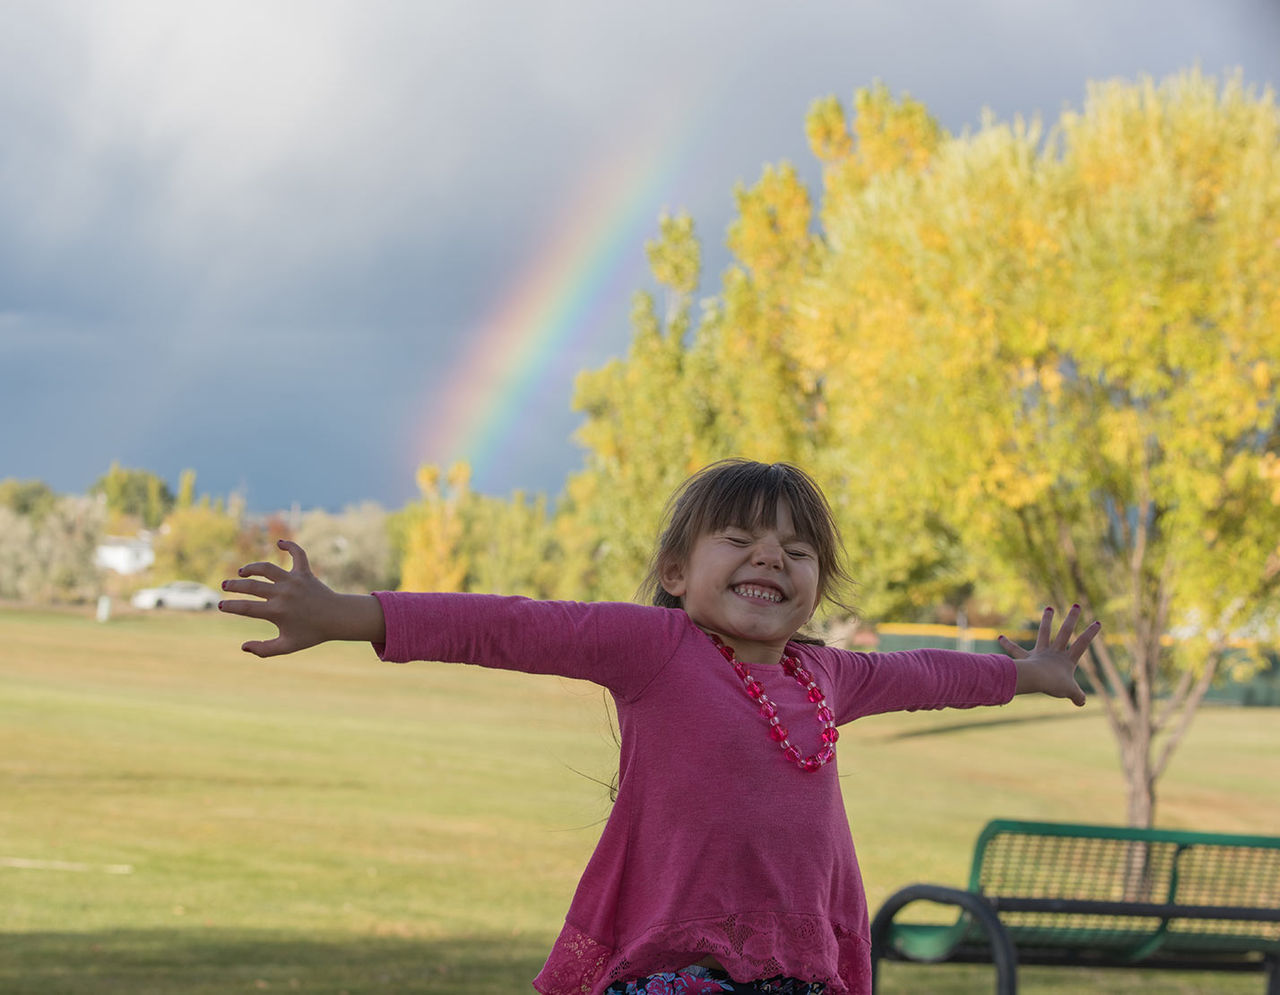 A child smiling with outstretched arms, in a pink long-sleeve top and a necklace, at a park with a rainbow and tree in the background